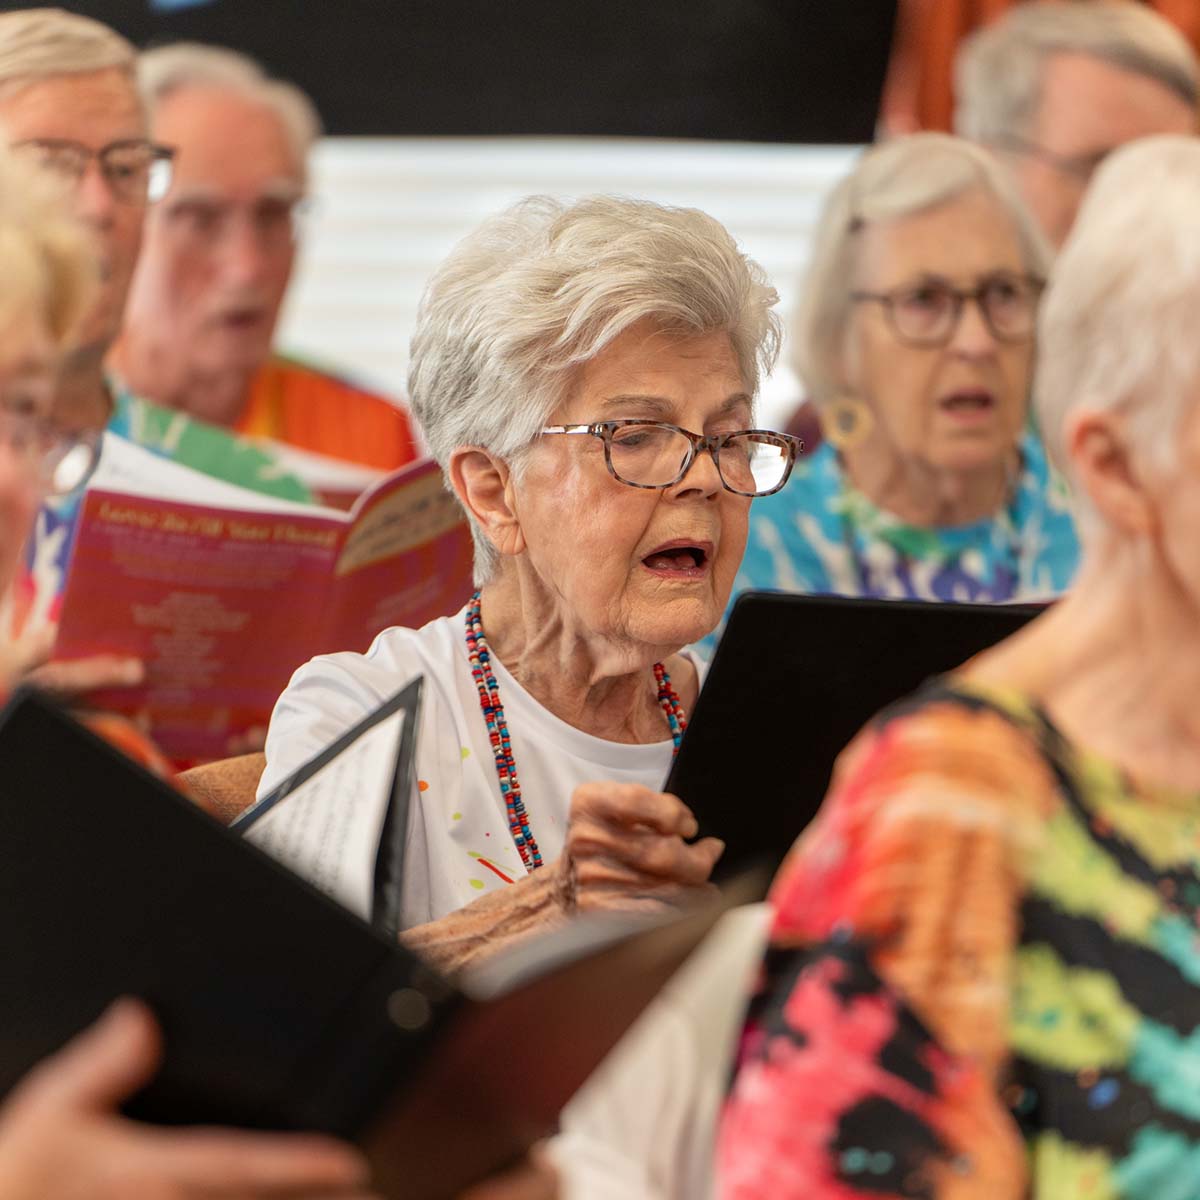 Several residents sing while looking at sheet music in the Immanuel choir.